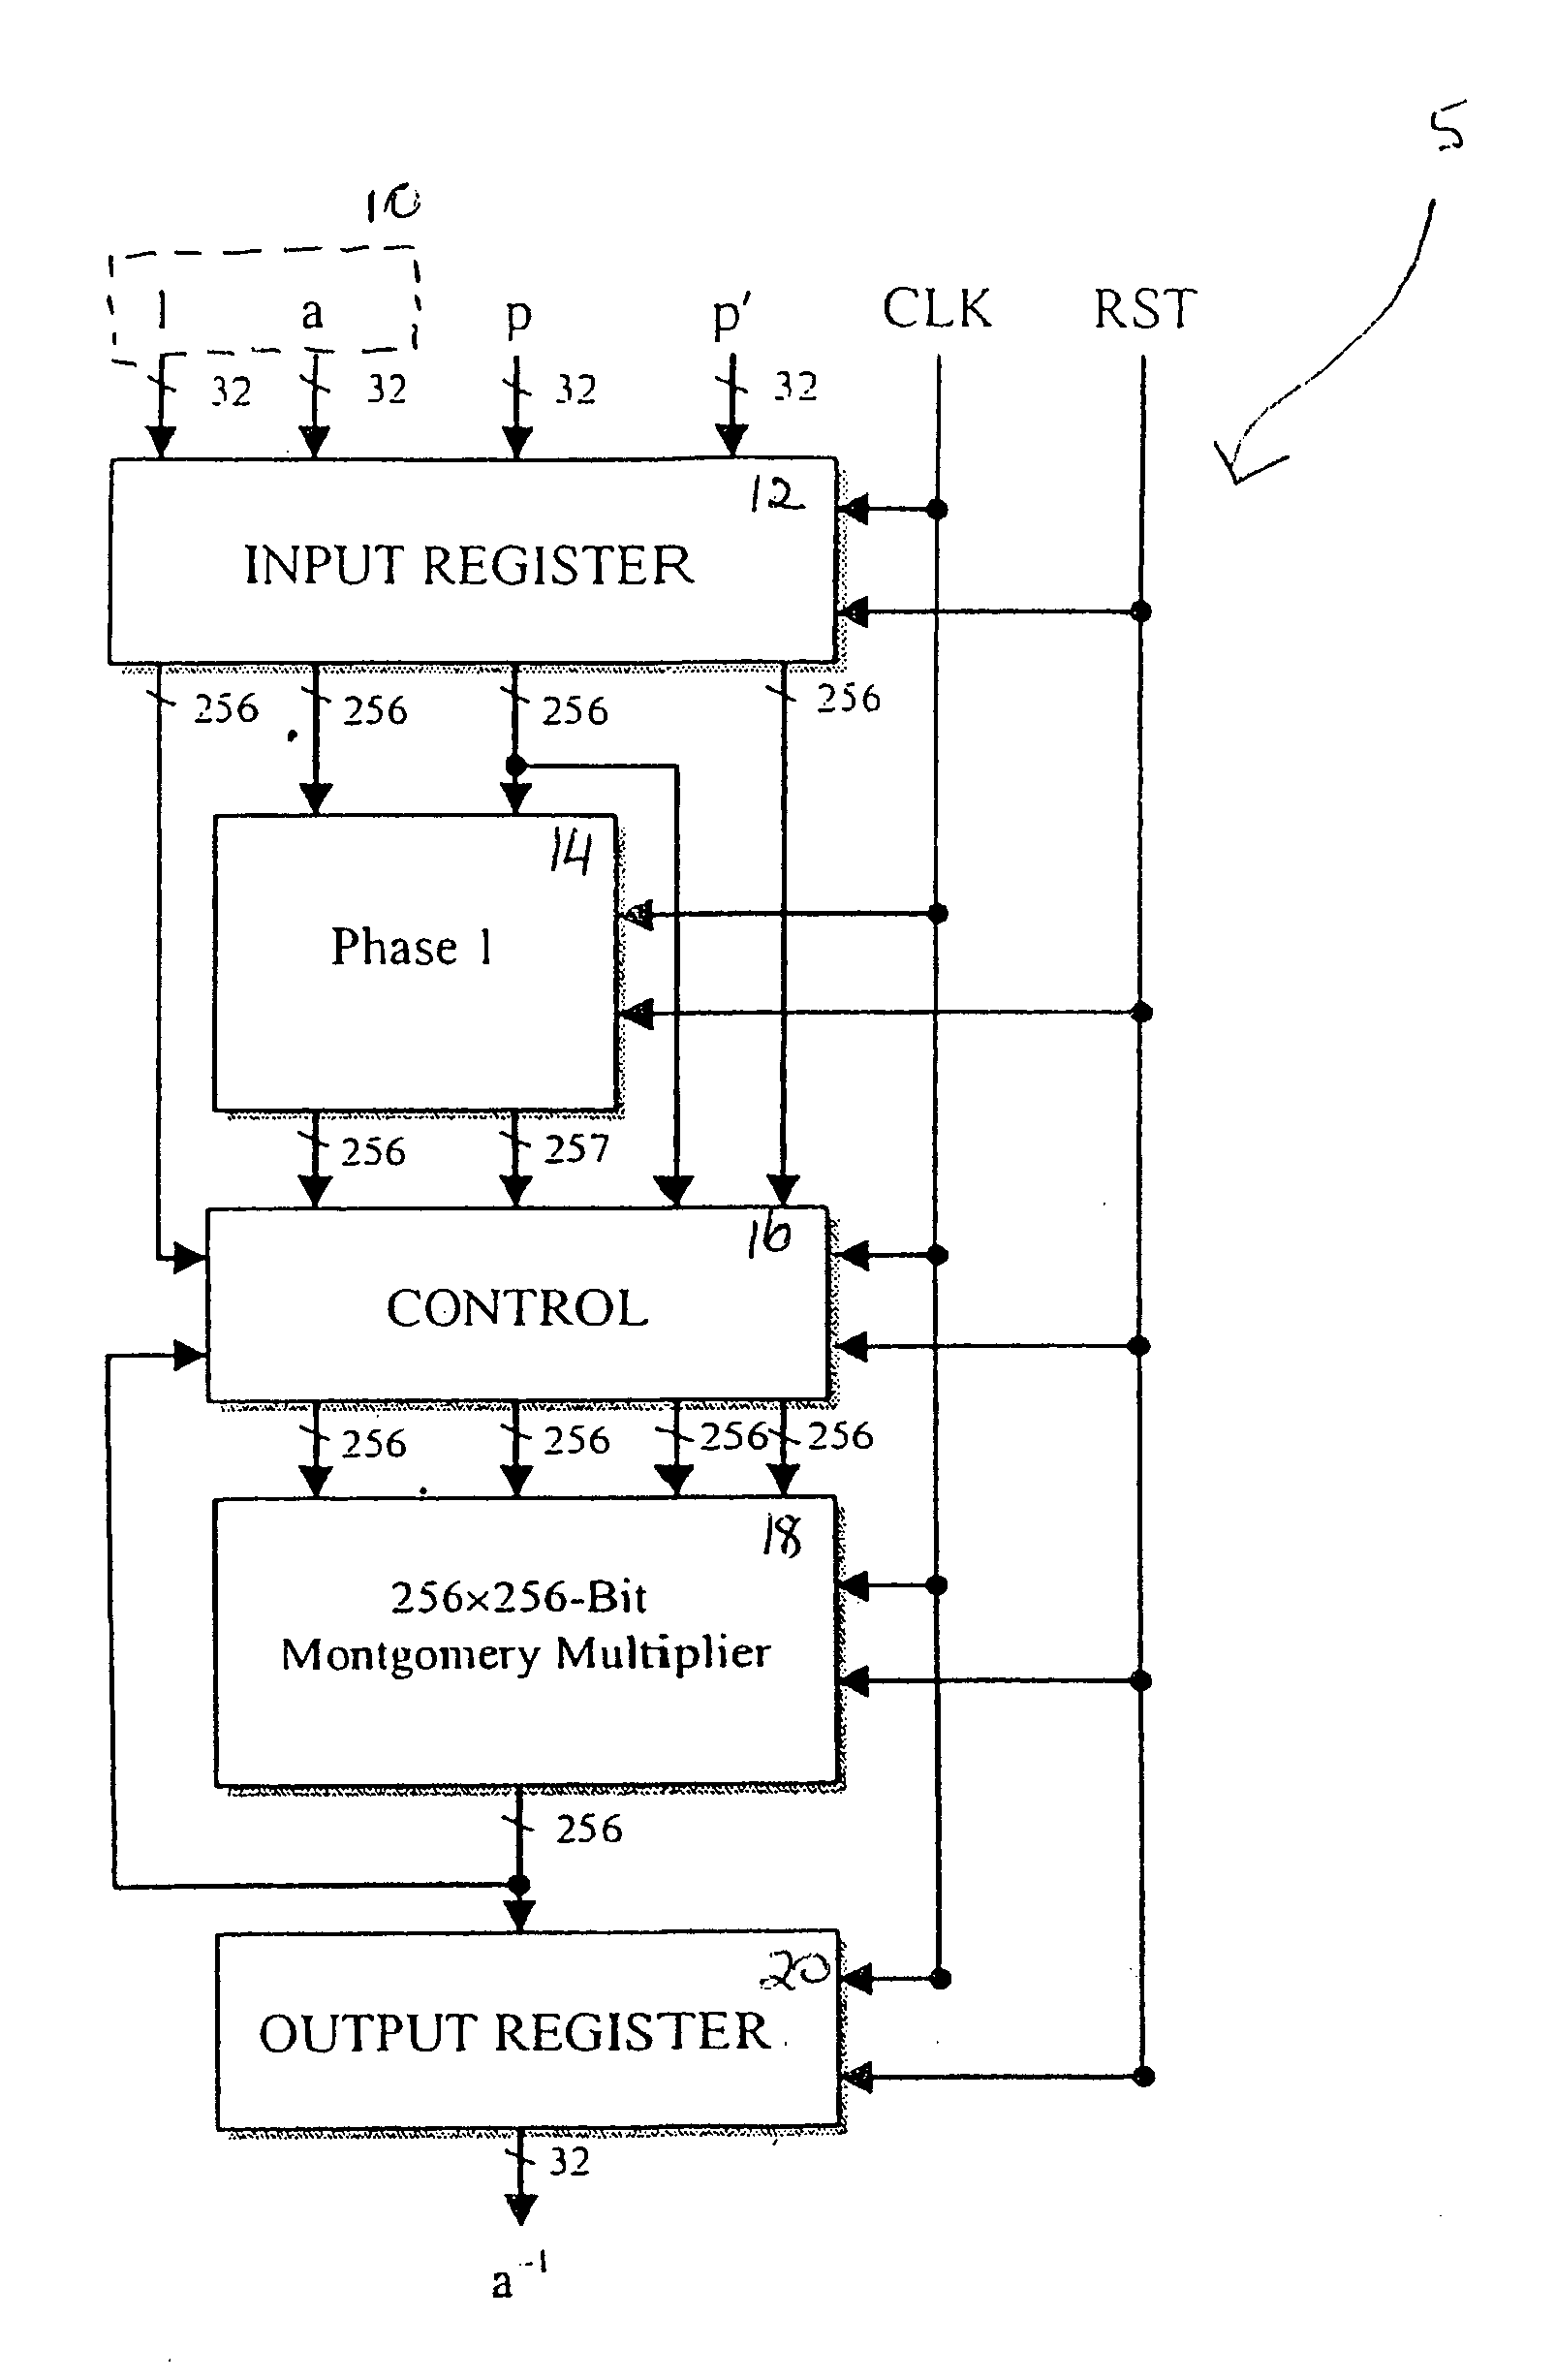 Method and apparatus for calculating a modular inverse